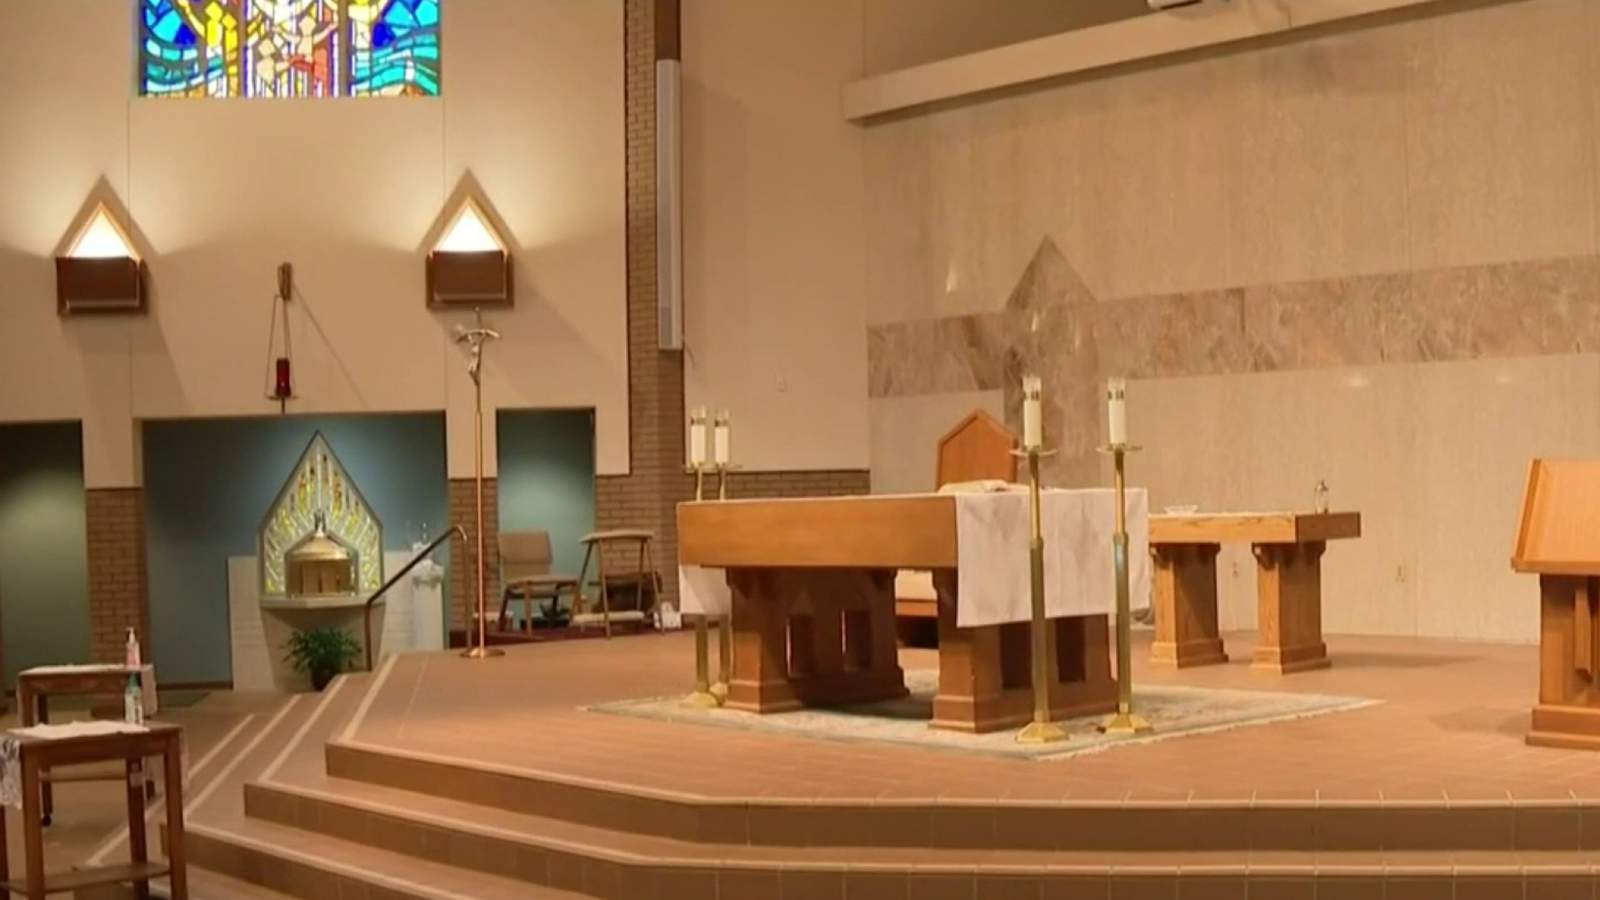 Several Michigan churches and parishes to reopen after pandemic hiatus